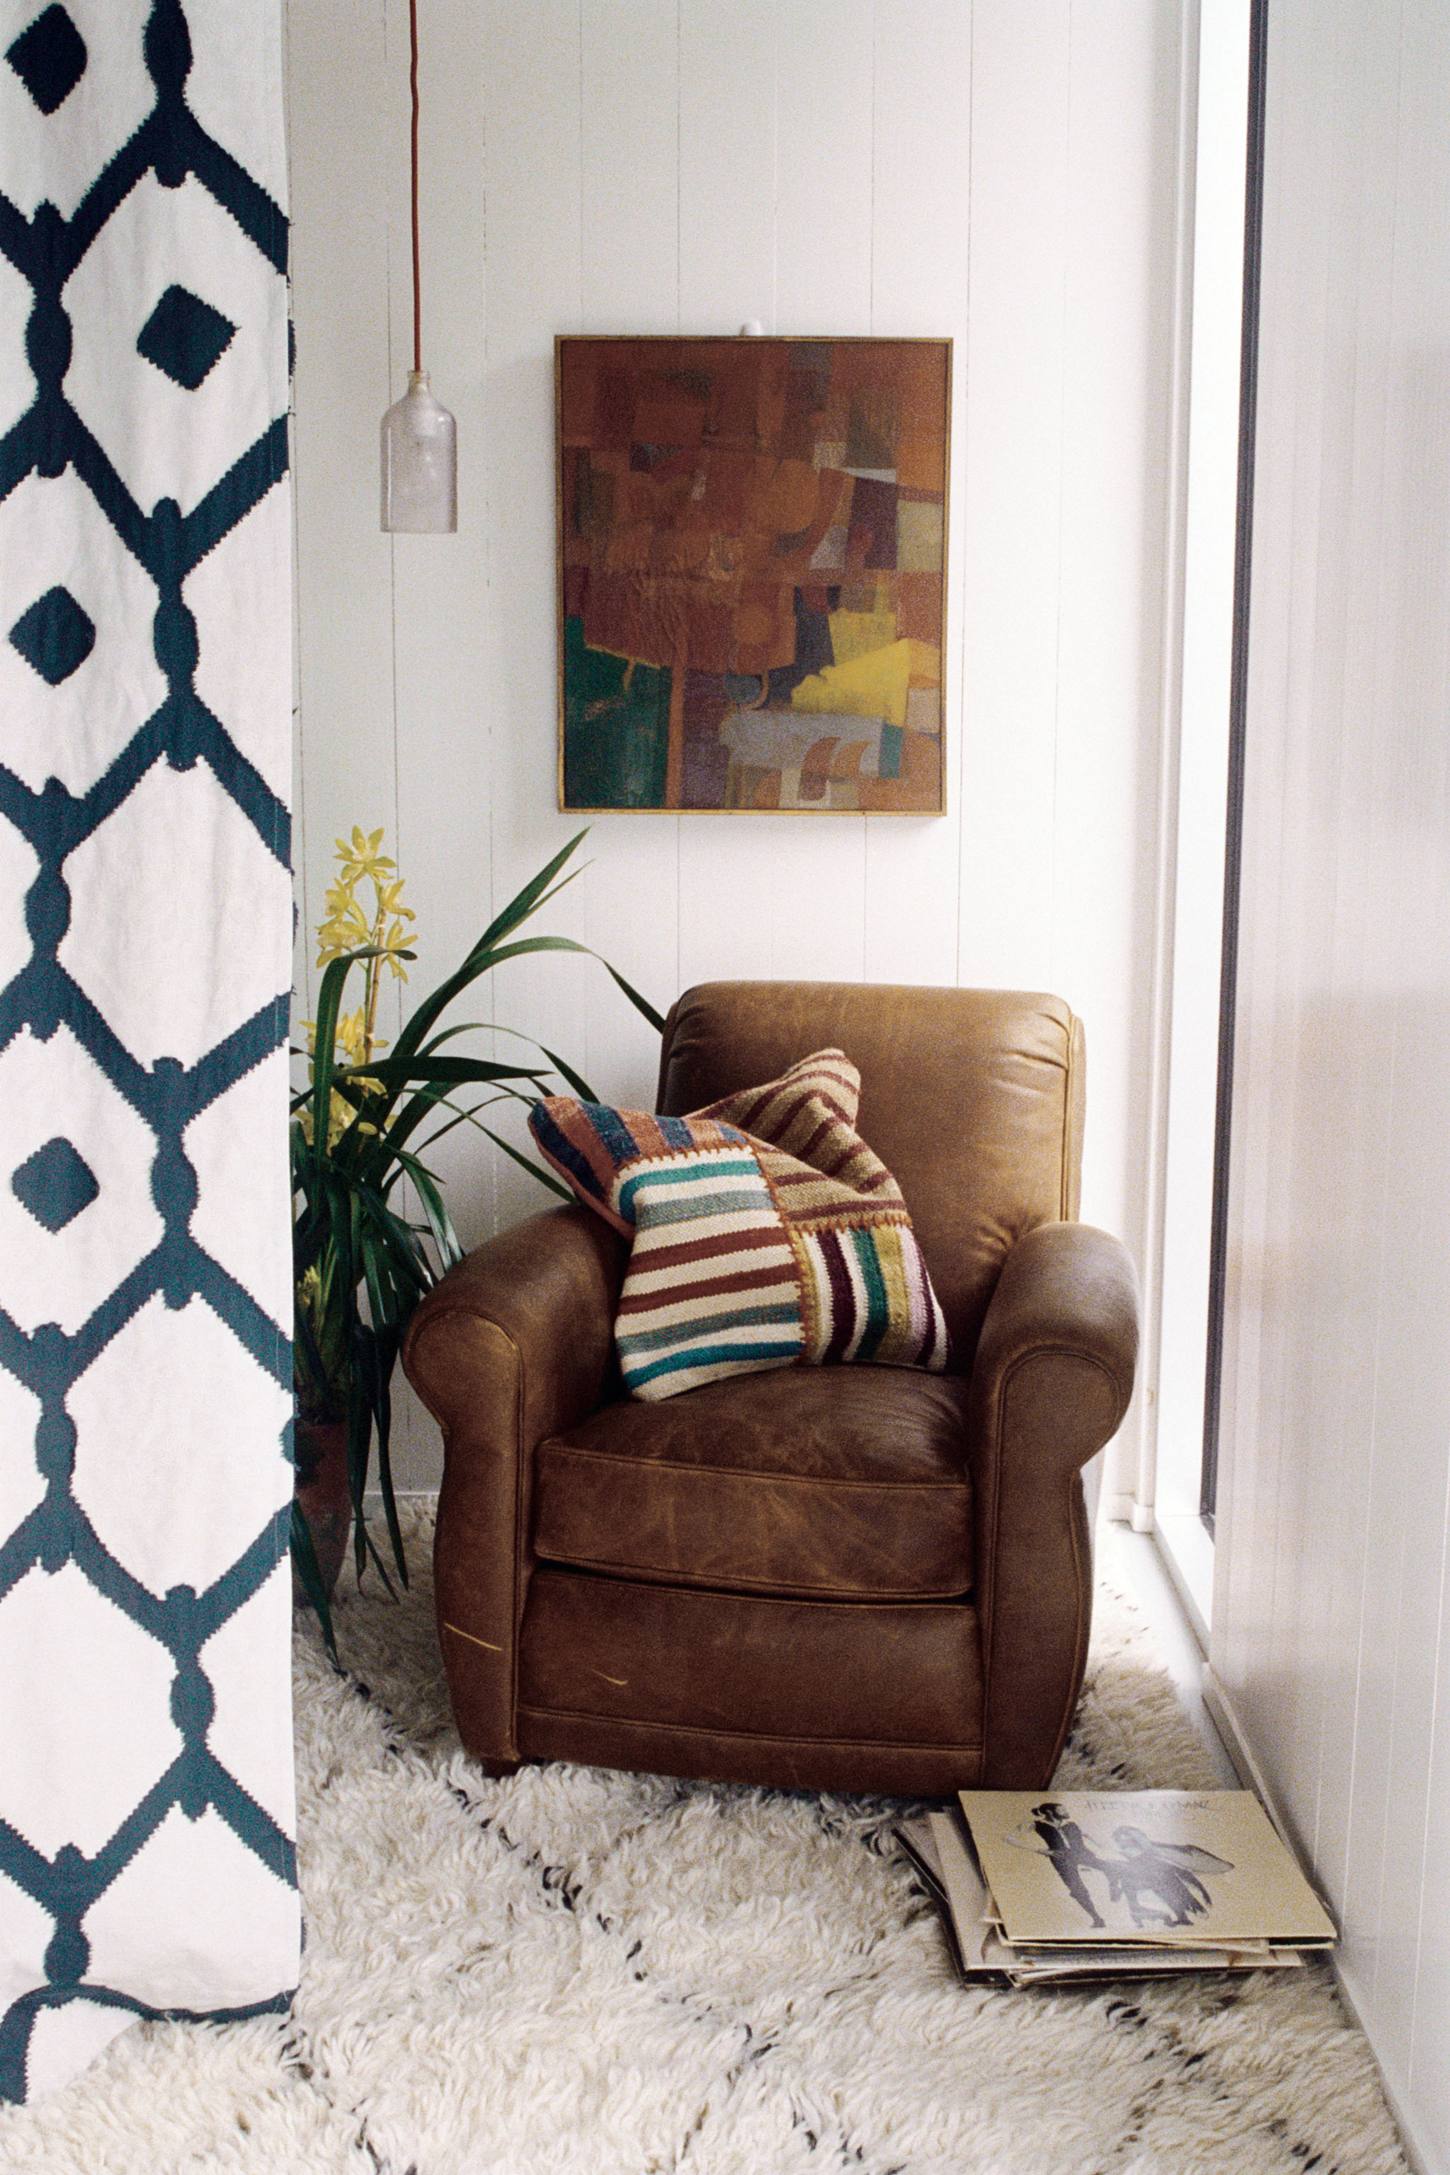 Call for submissions: Show the community how you Anthropologie-ize your home!